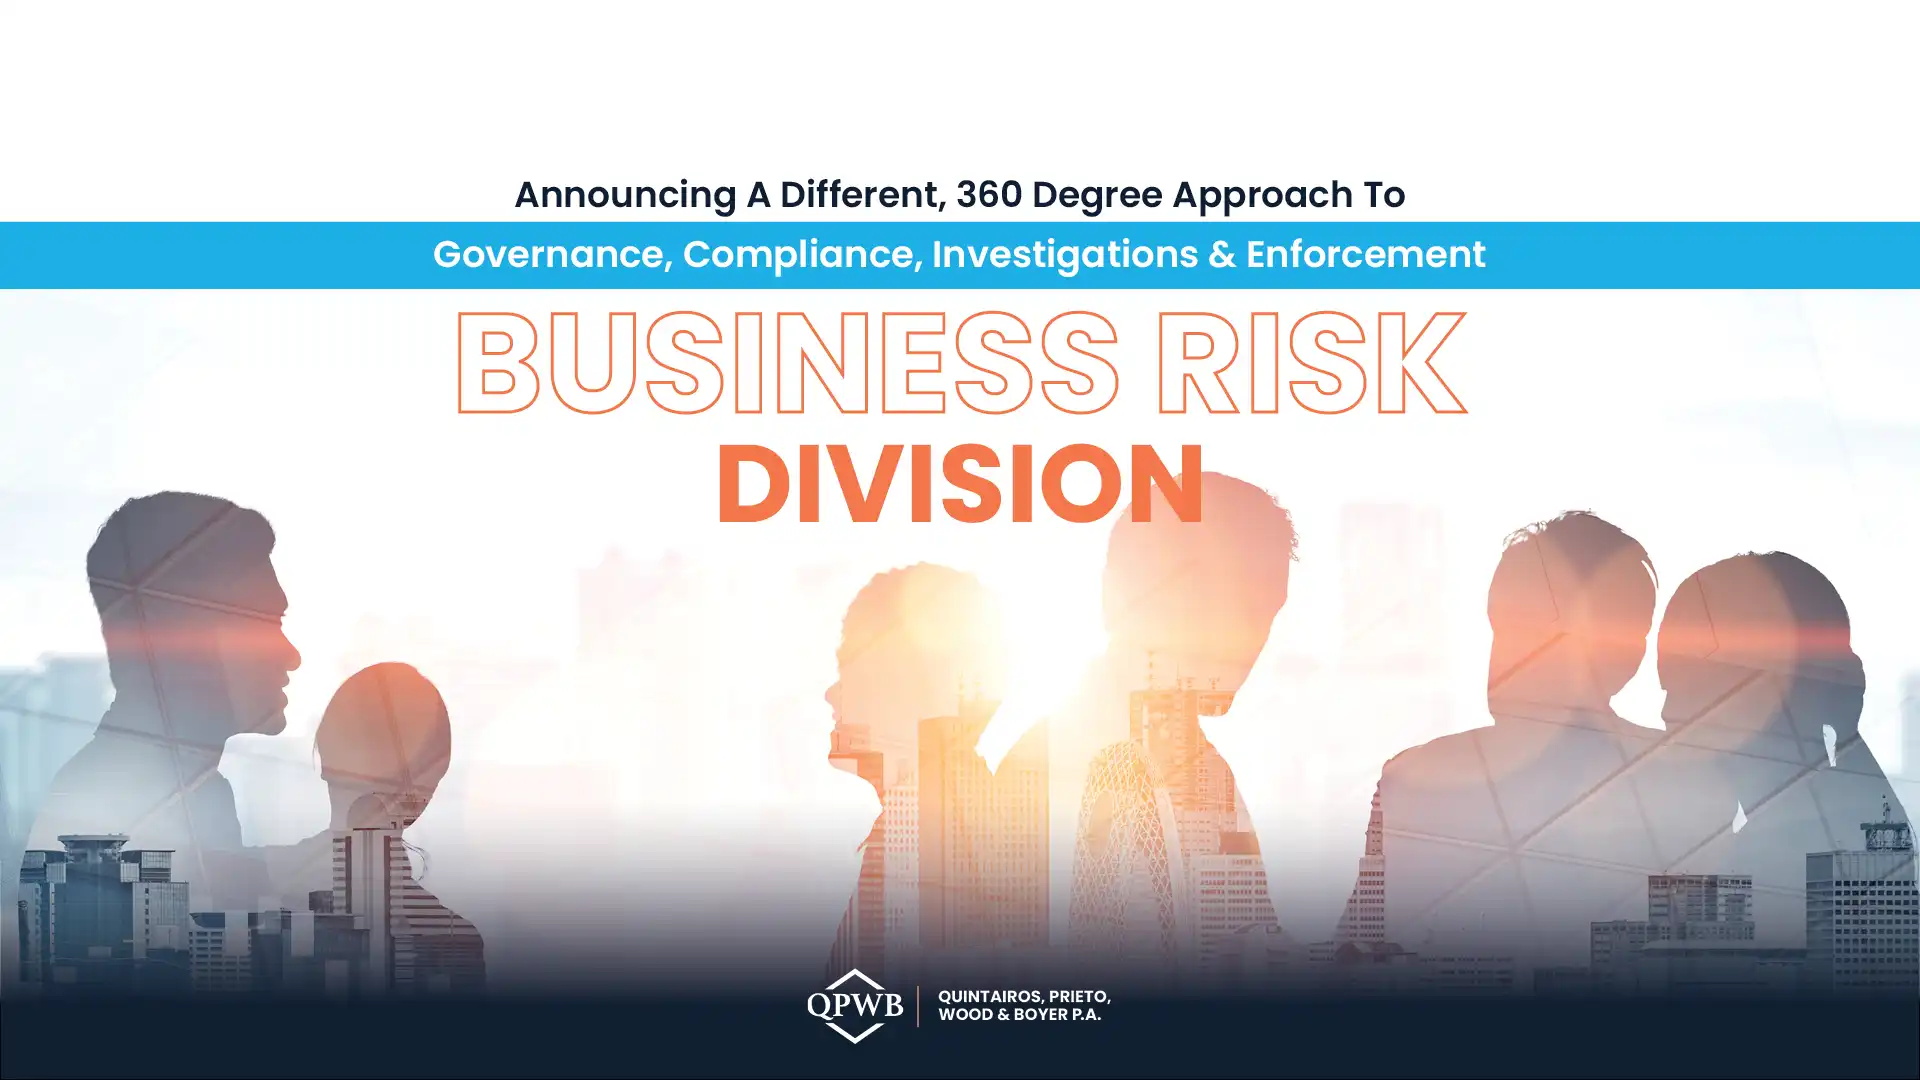 Announcing A Different, 360 Degree Approach To Governance, Compliance, Investigations & Enforcement With The Business Risk Division